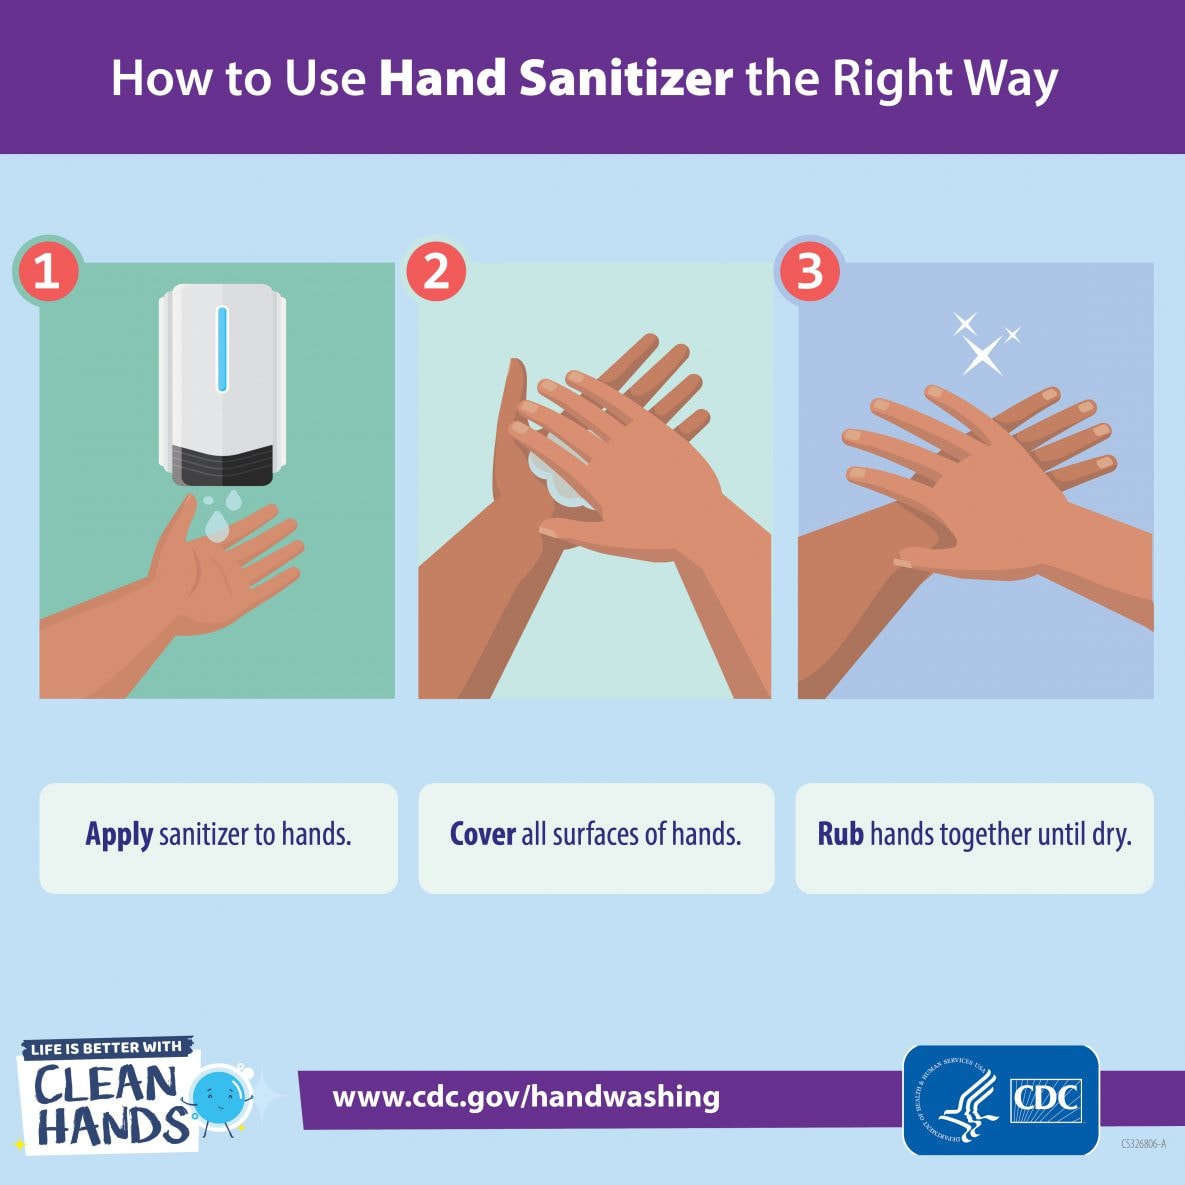 How to Use Hand Sanitizer the Right Way